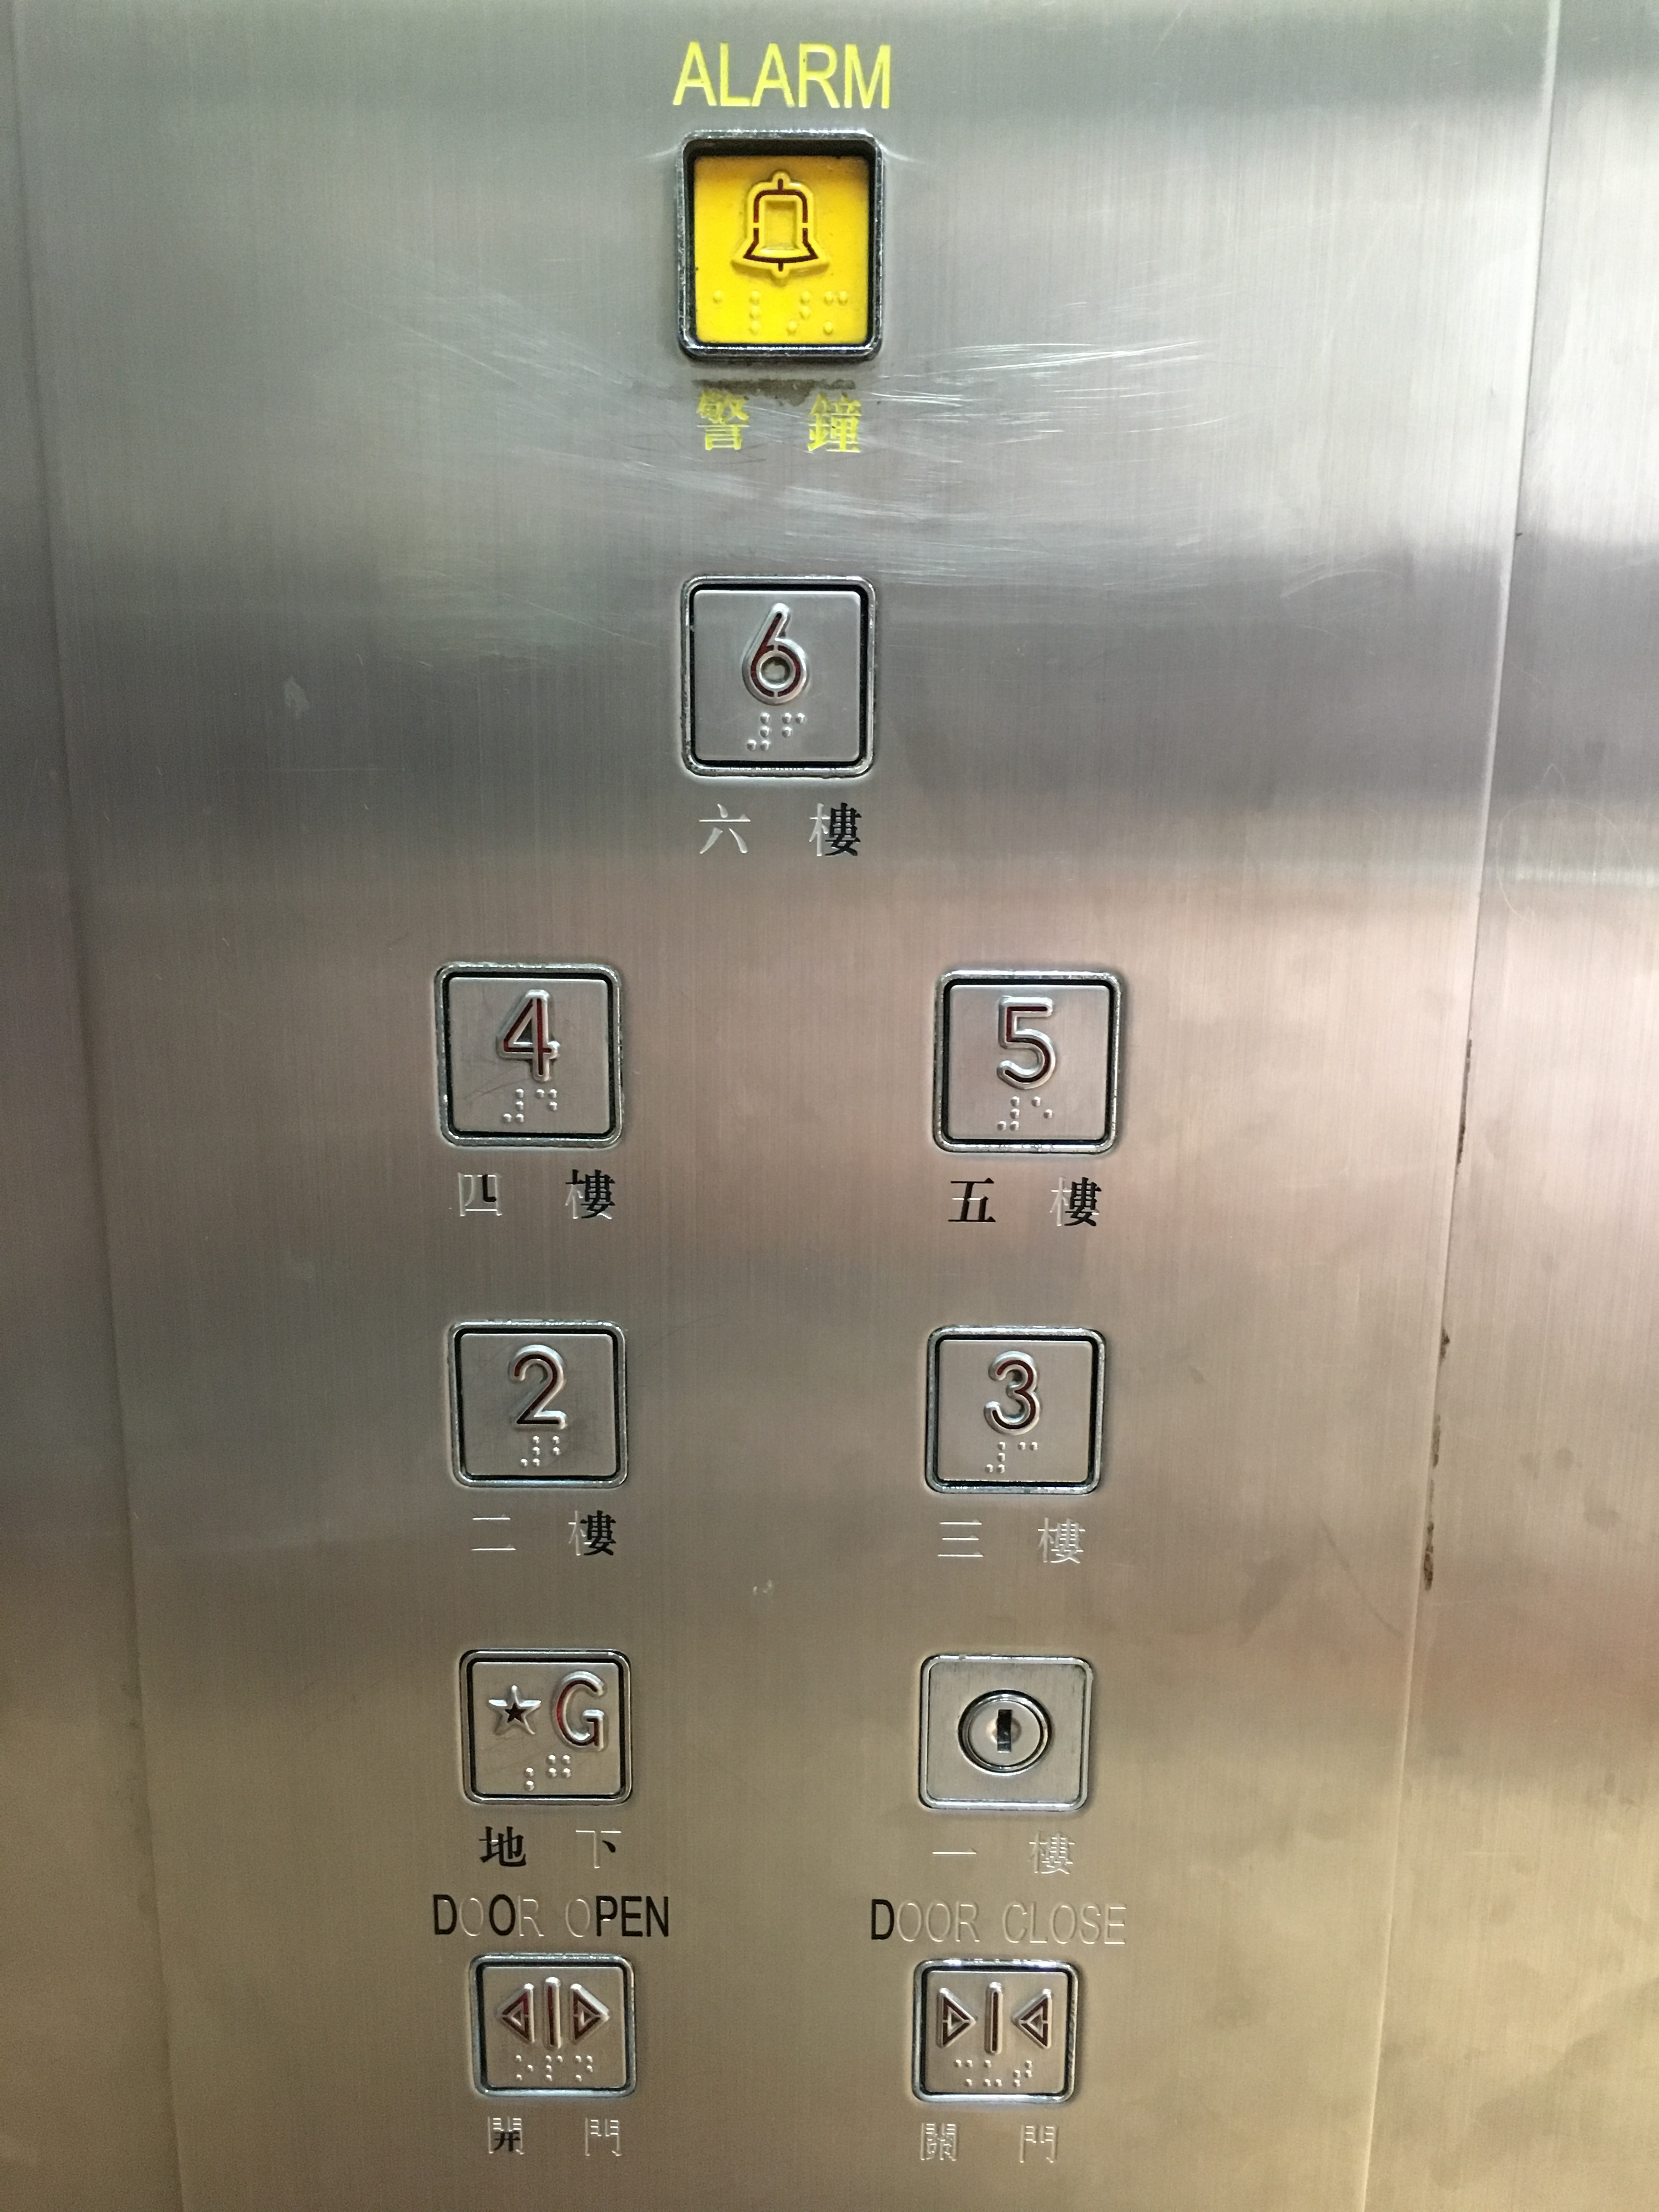 Tactile-braille indicators in passenger lifts